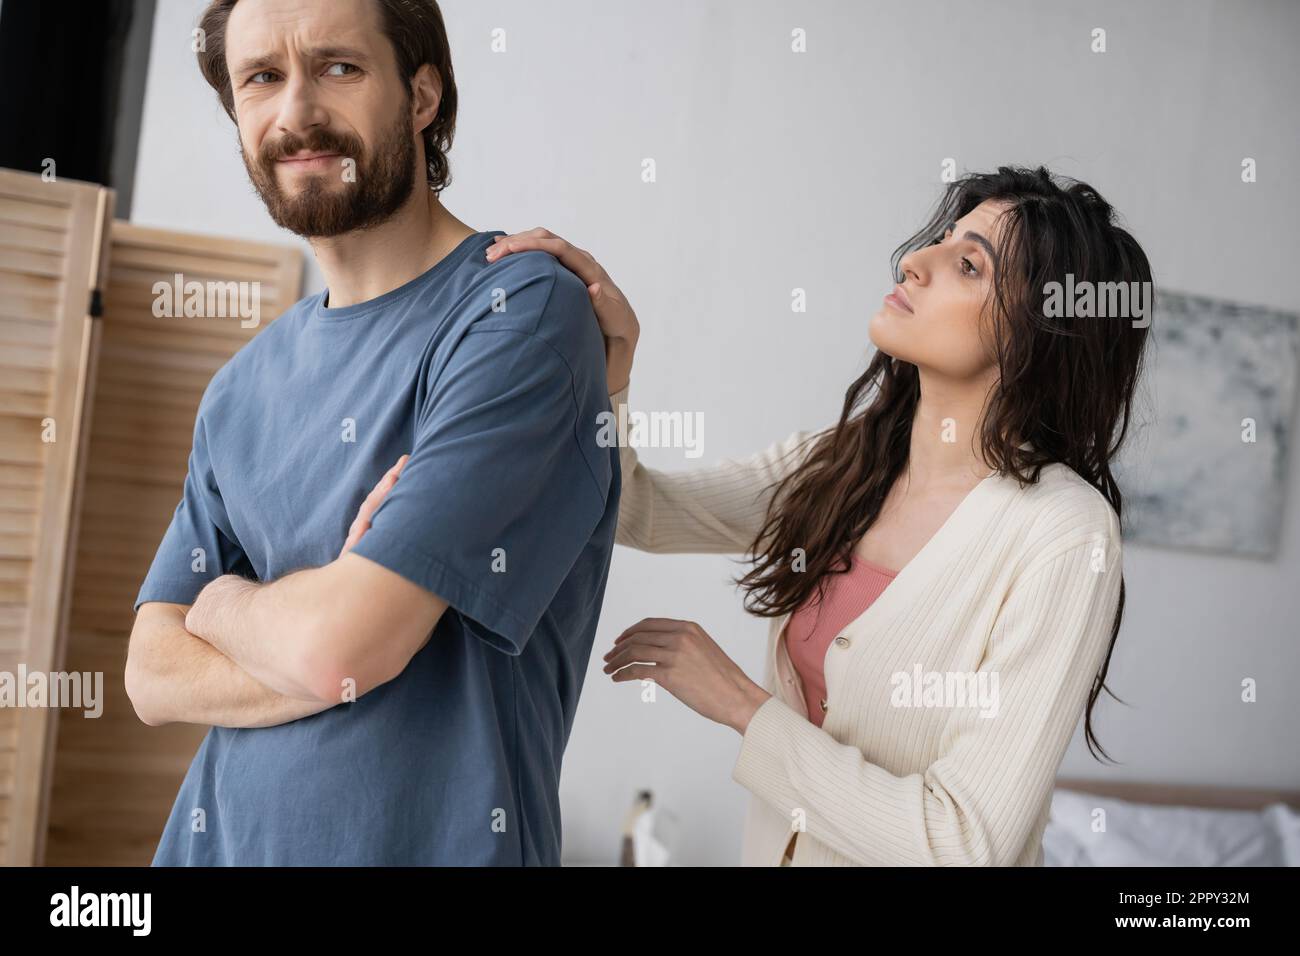 Brunette woman calming down offended boyfriend with crossed arms at home,stock image Stock Photo